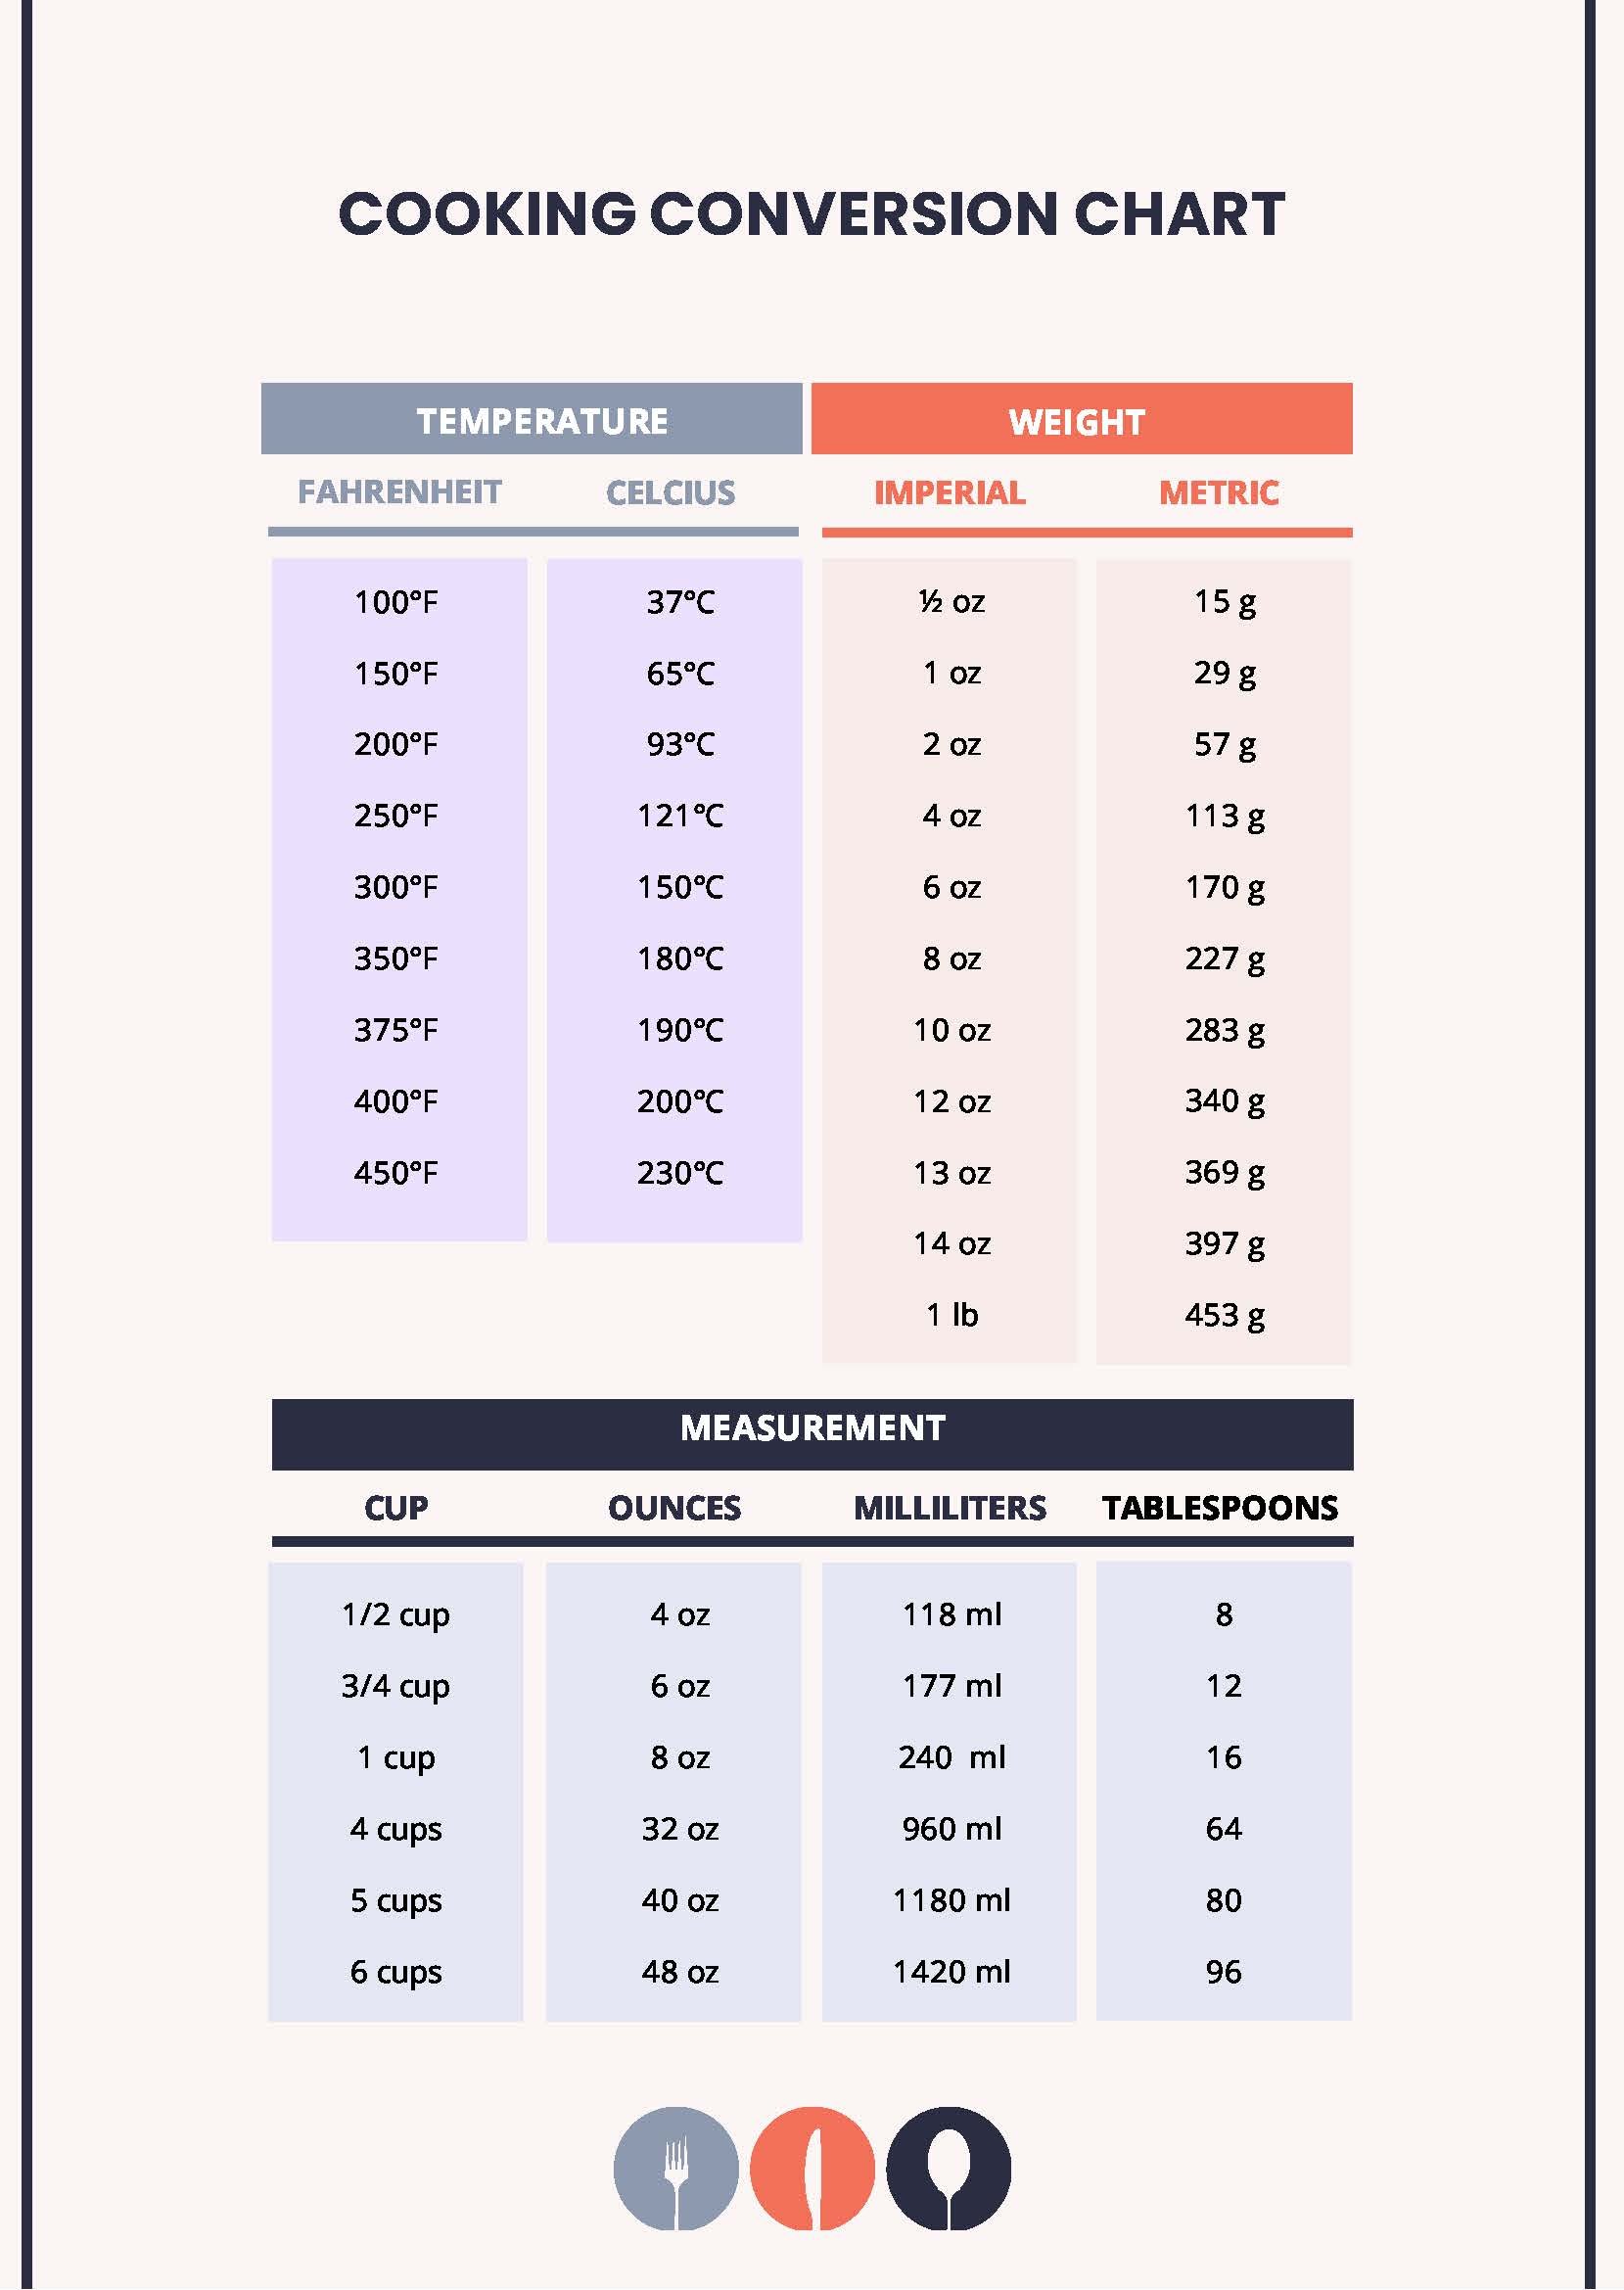 kitchen-conversion-chart-magnet-liquid-weight-cooking-conversion-cheat-sheet-imperial-metric-to